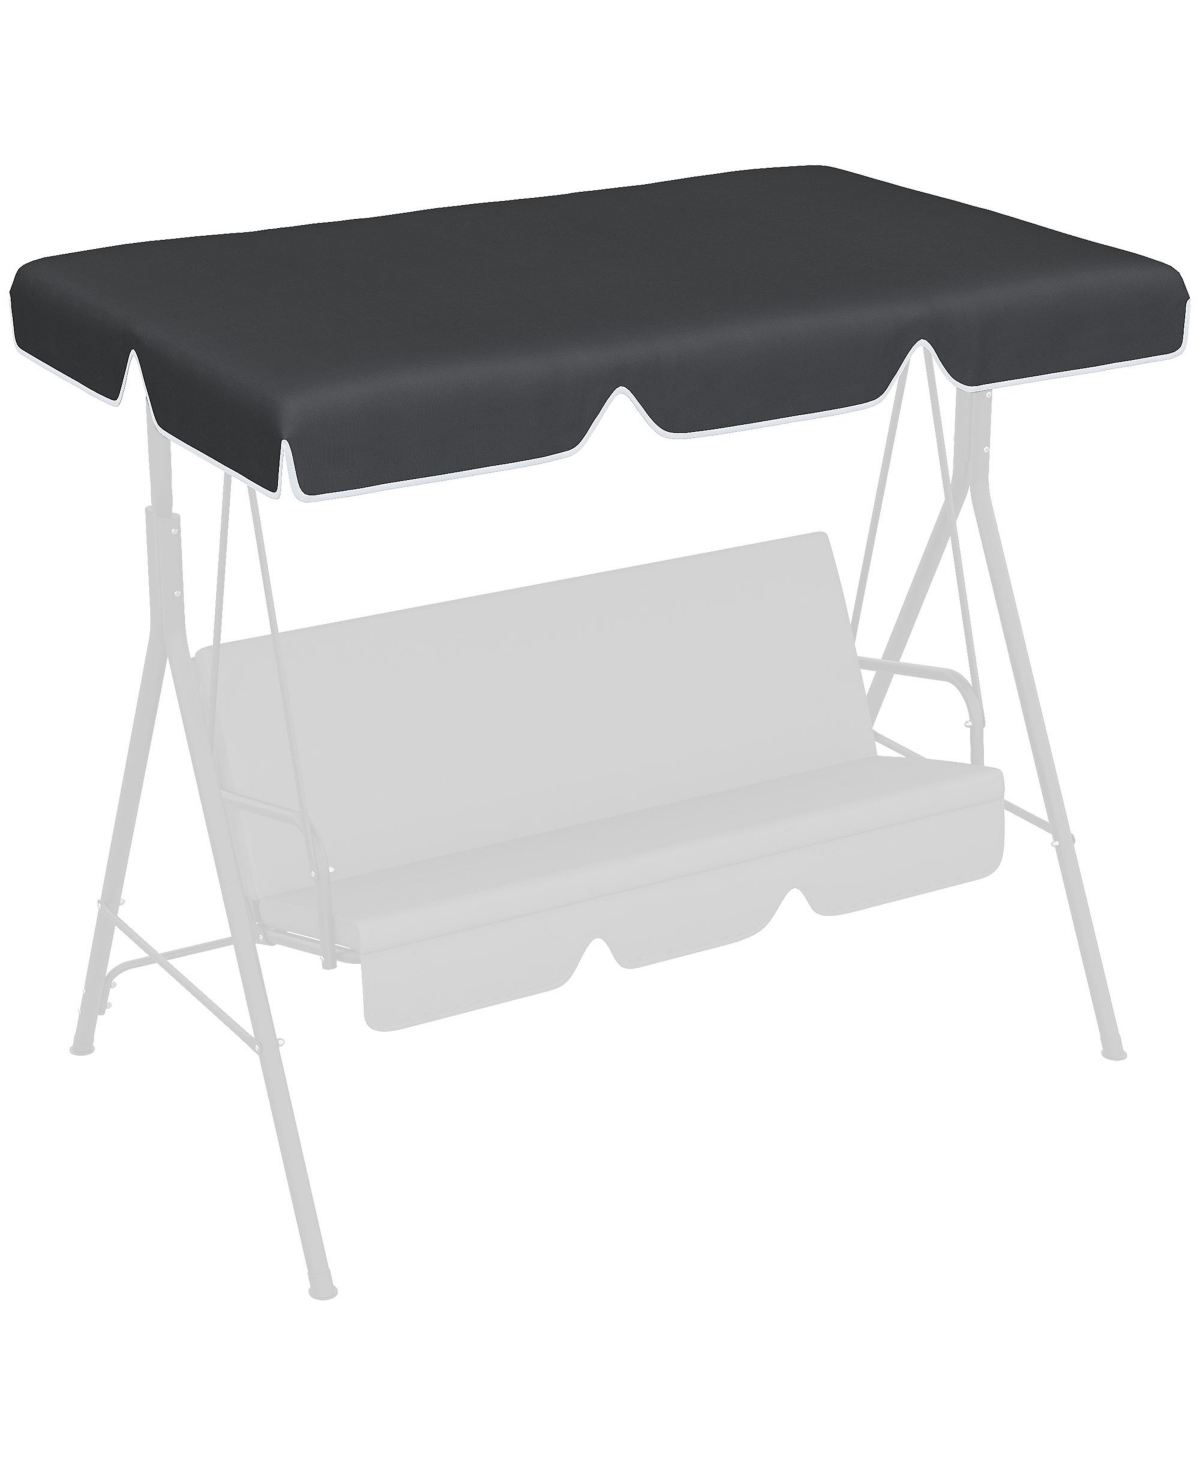 2 Seater Swing Canopy Replacement, Outdoor Swing Seat Top Cover, UV50+ Sun Shade (Canopy Only), Black - Black